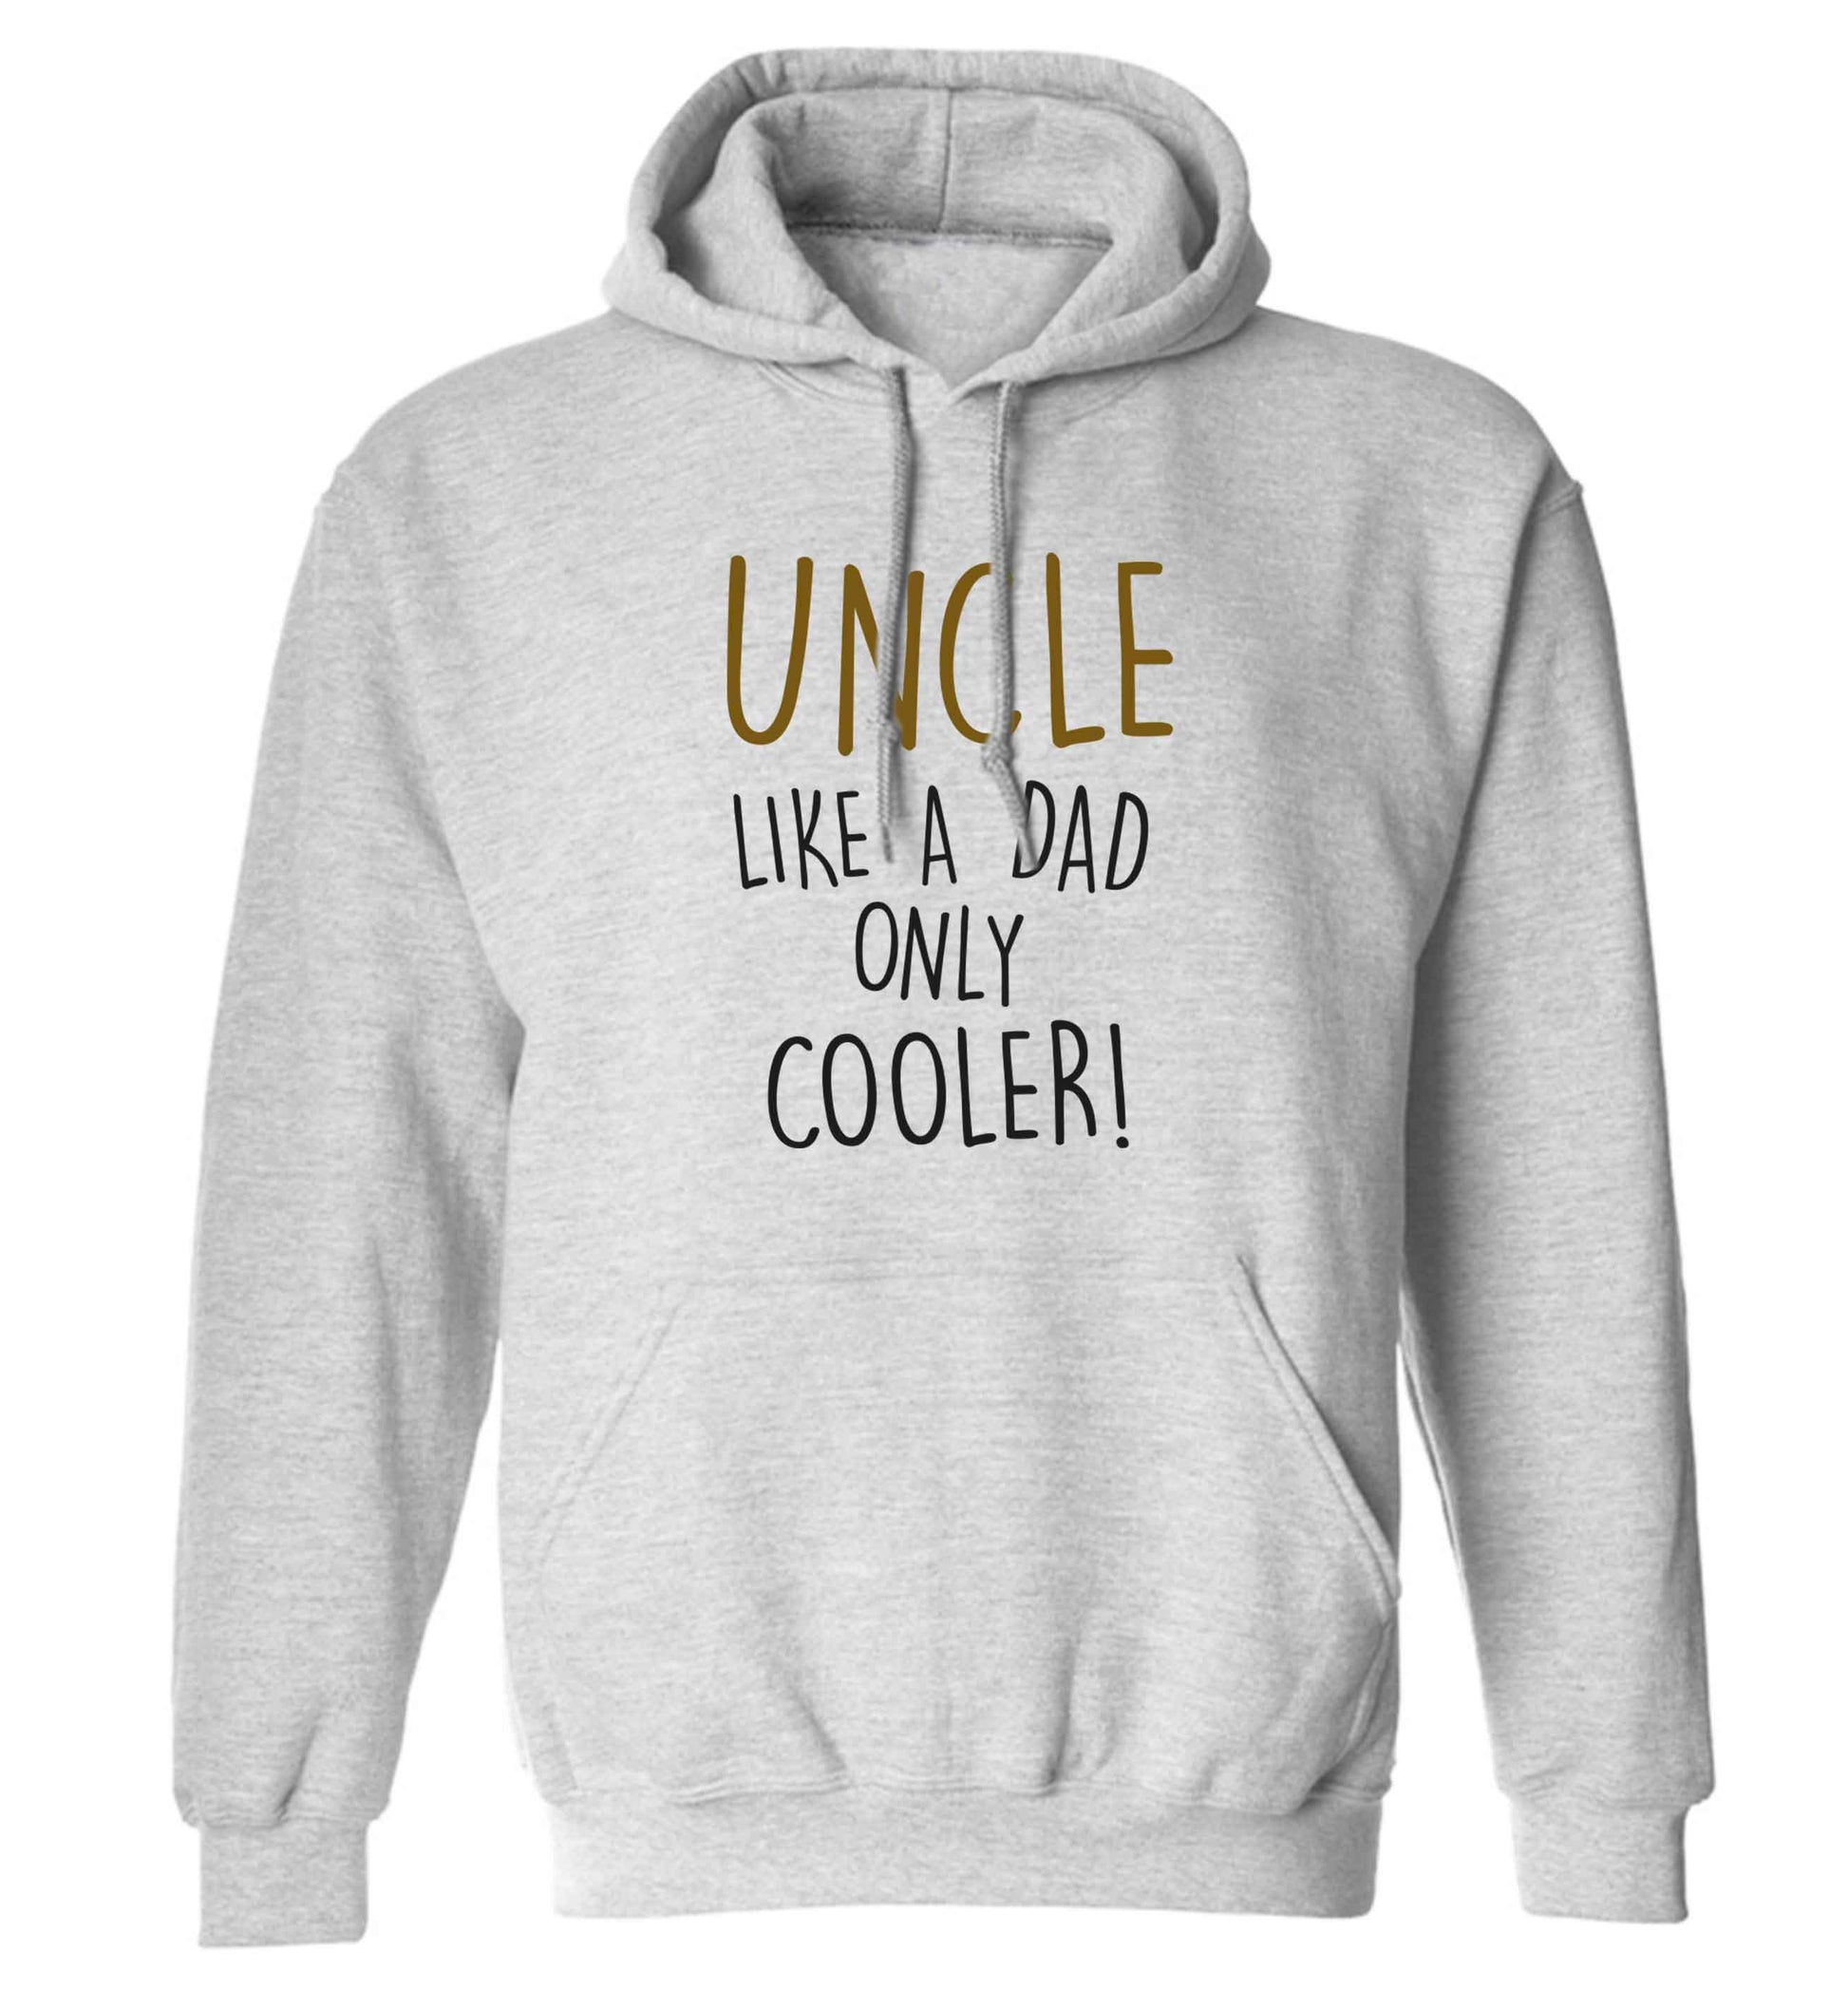 Uncle like a dad only cooler adults unisex grey hoodie 2XL